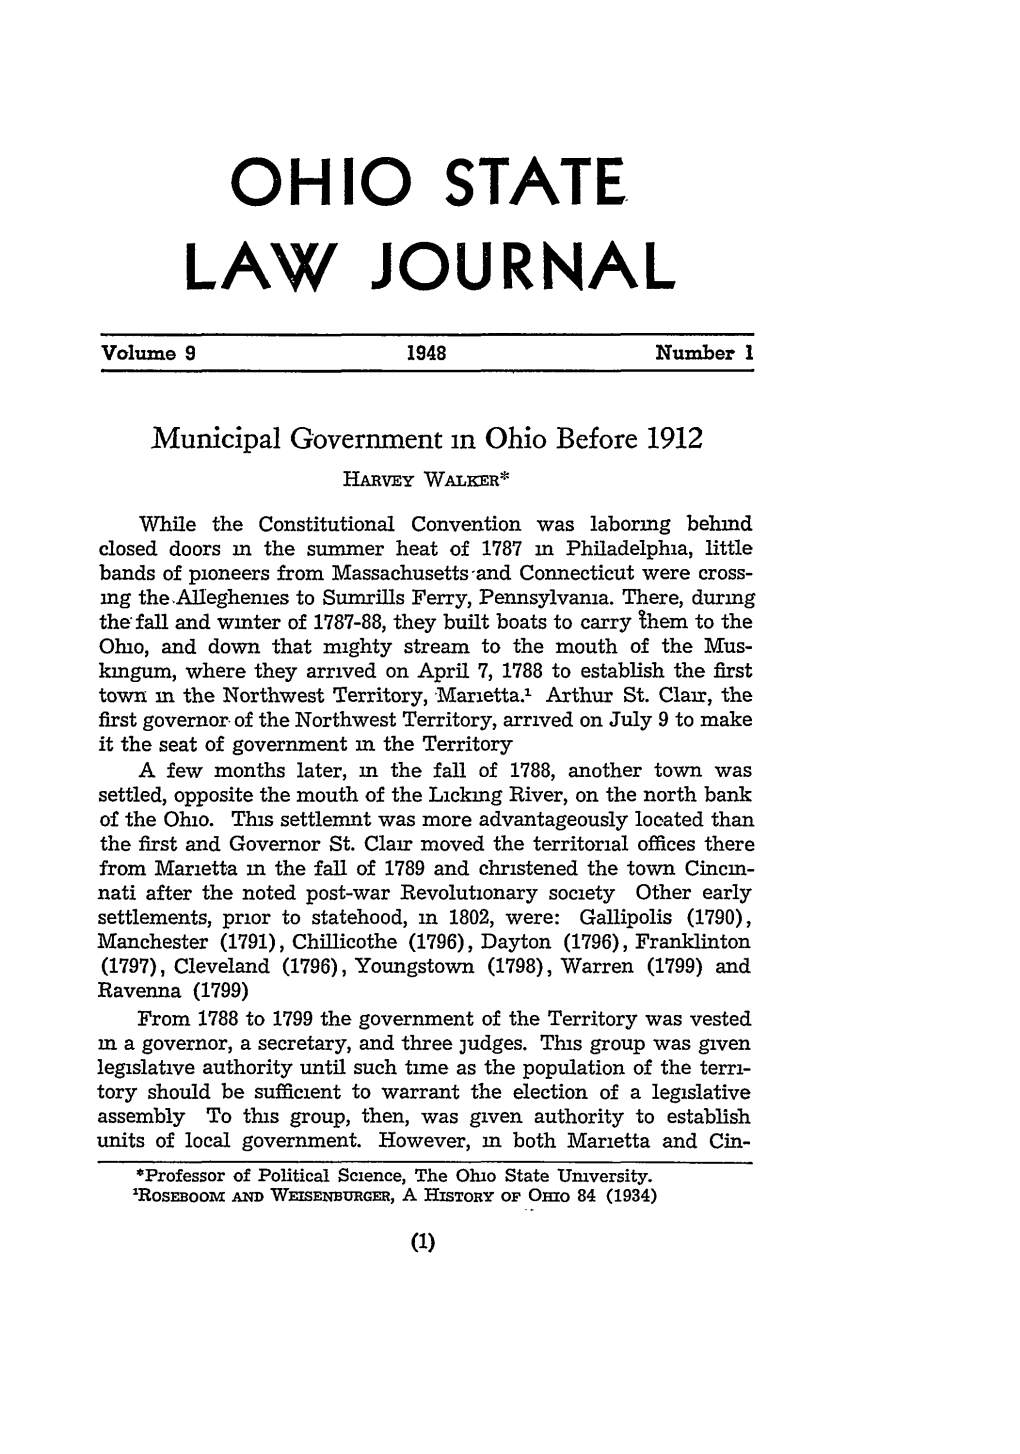 Municipal Government in Ohio Before 1912 HARVEY WALKER*